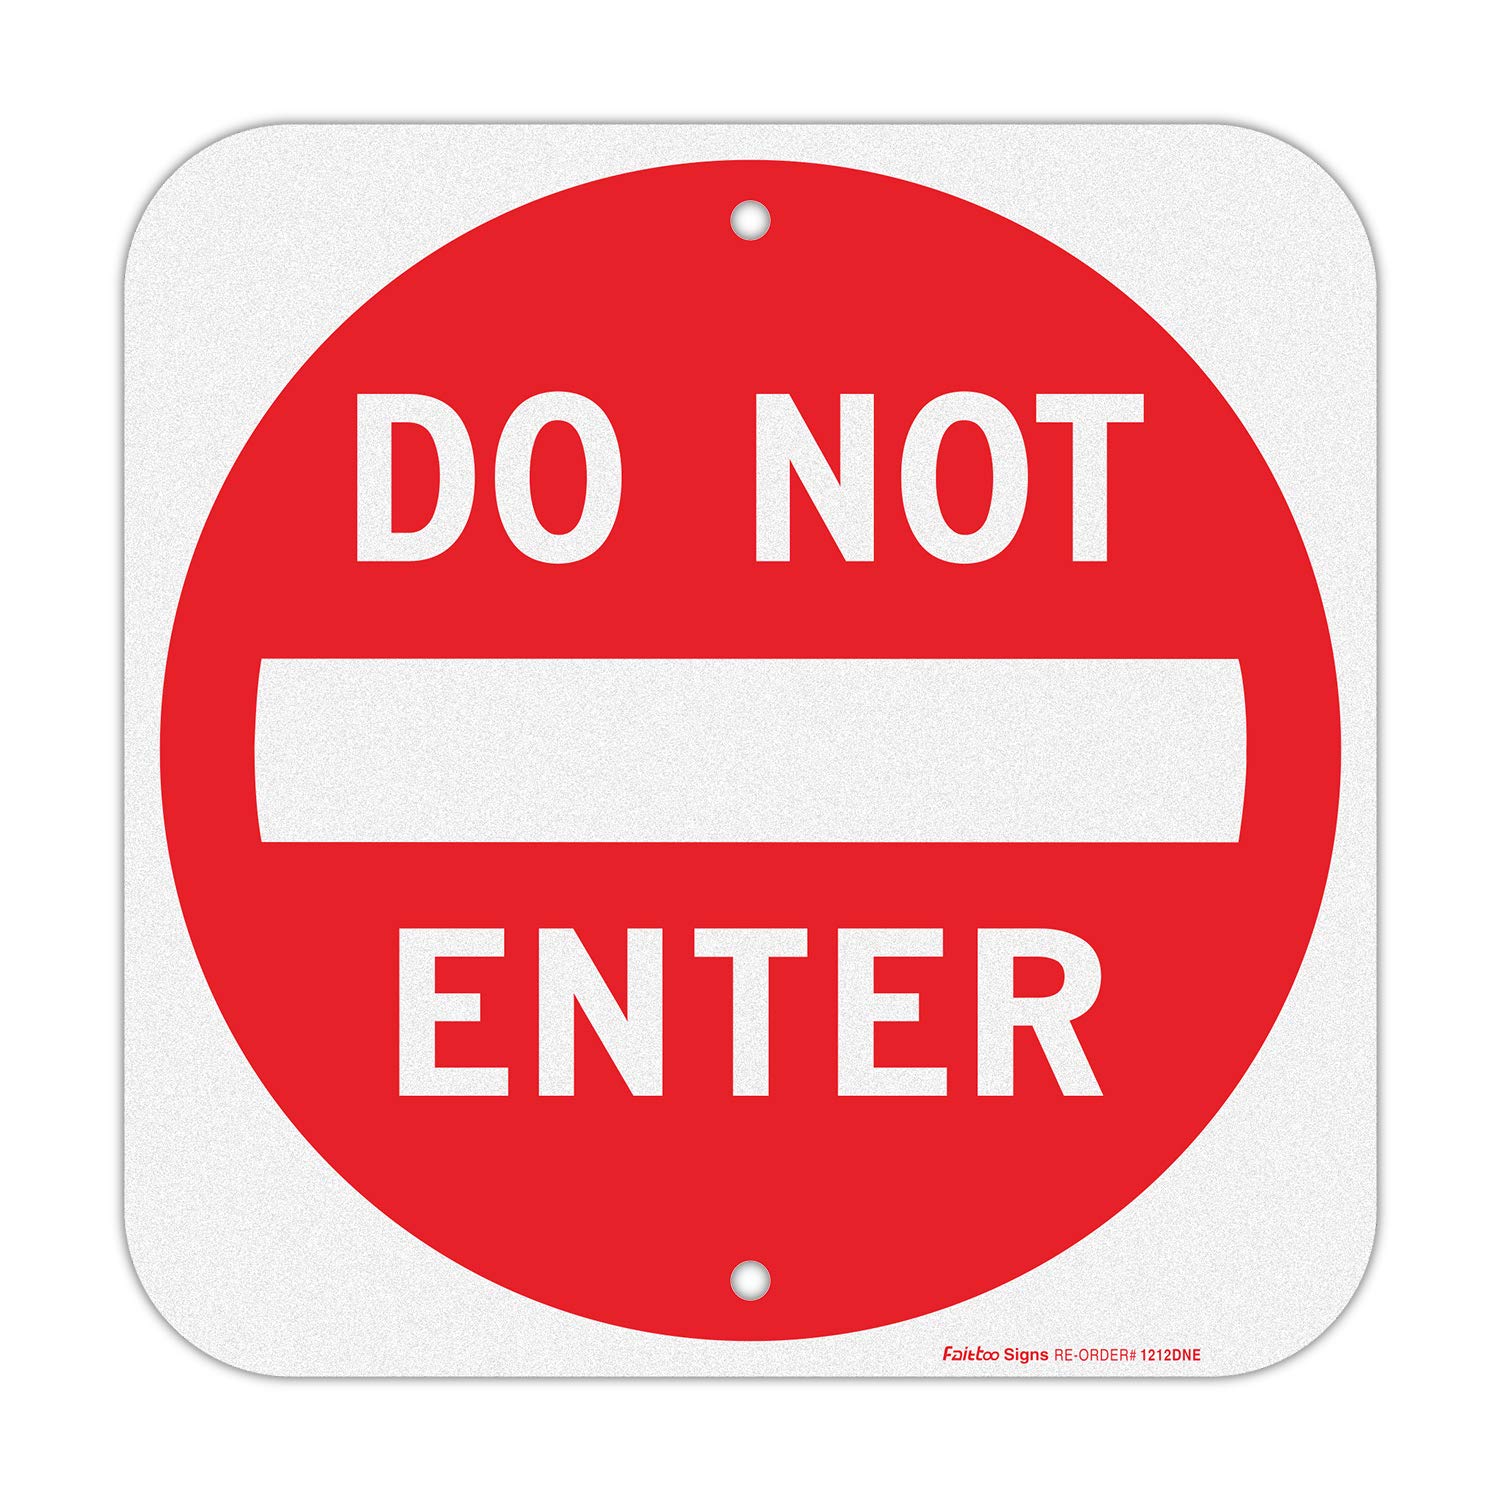 Do Not Enter Sign,12x12 Inch Square .040 Aluminum,Reflective Rust Free Metal Sign,Fade/ Weather Resistant,Easy to Mount,Indoor/Outdoor Use